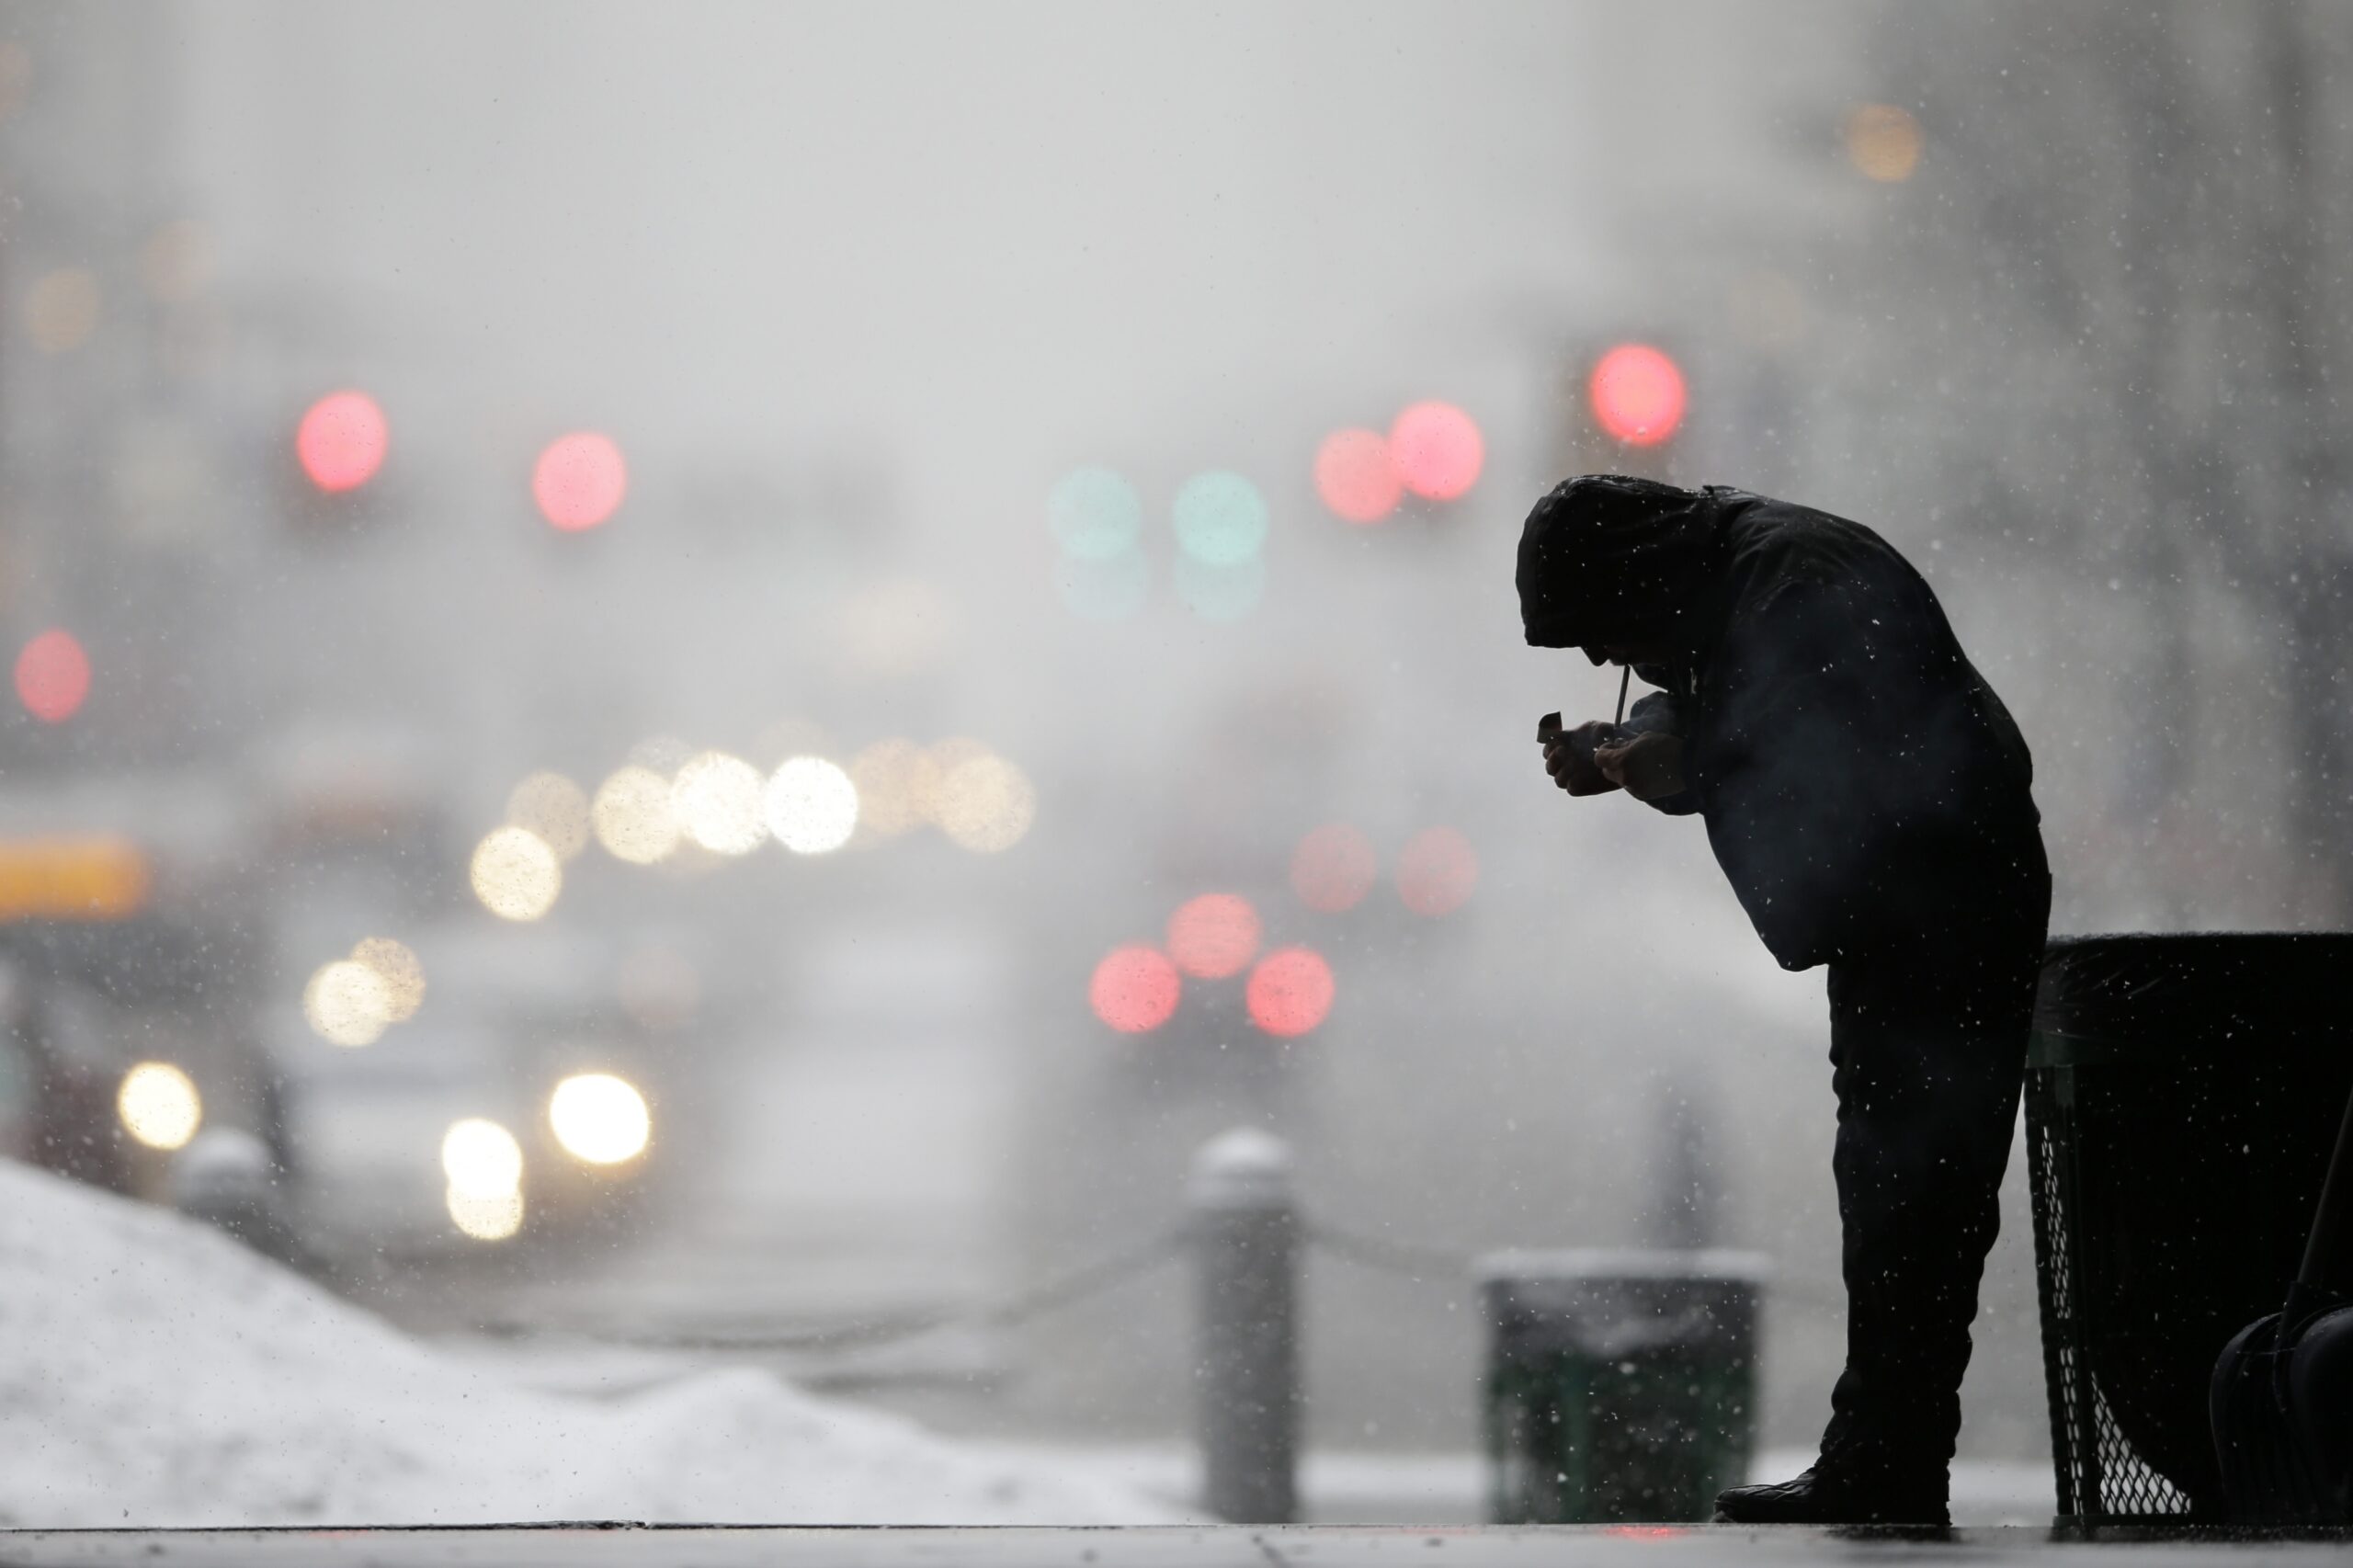 A man lights up a cigarette in winter